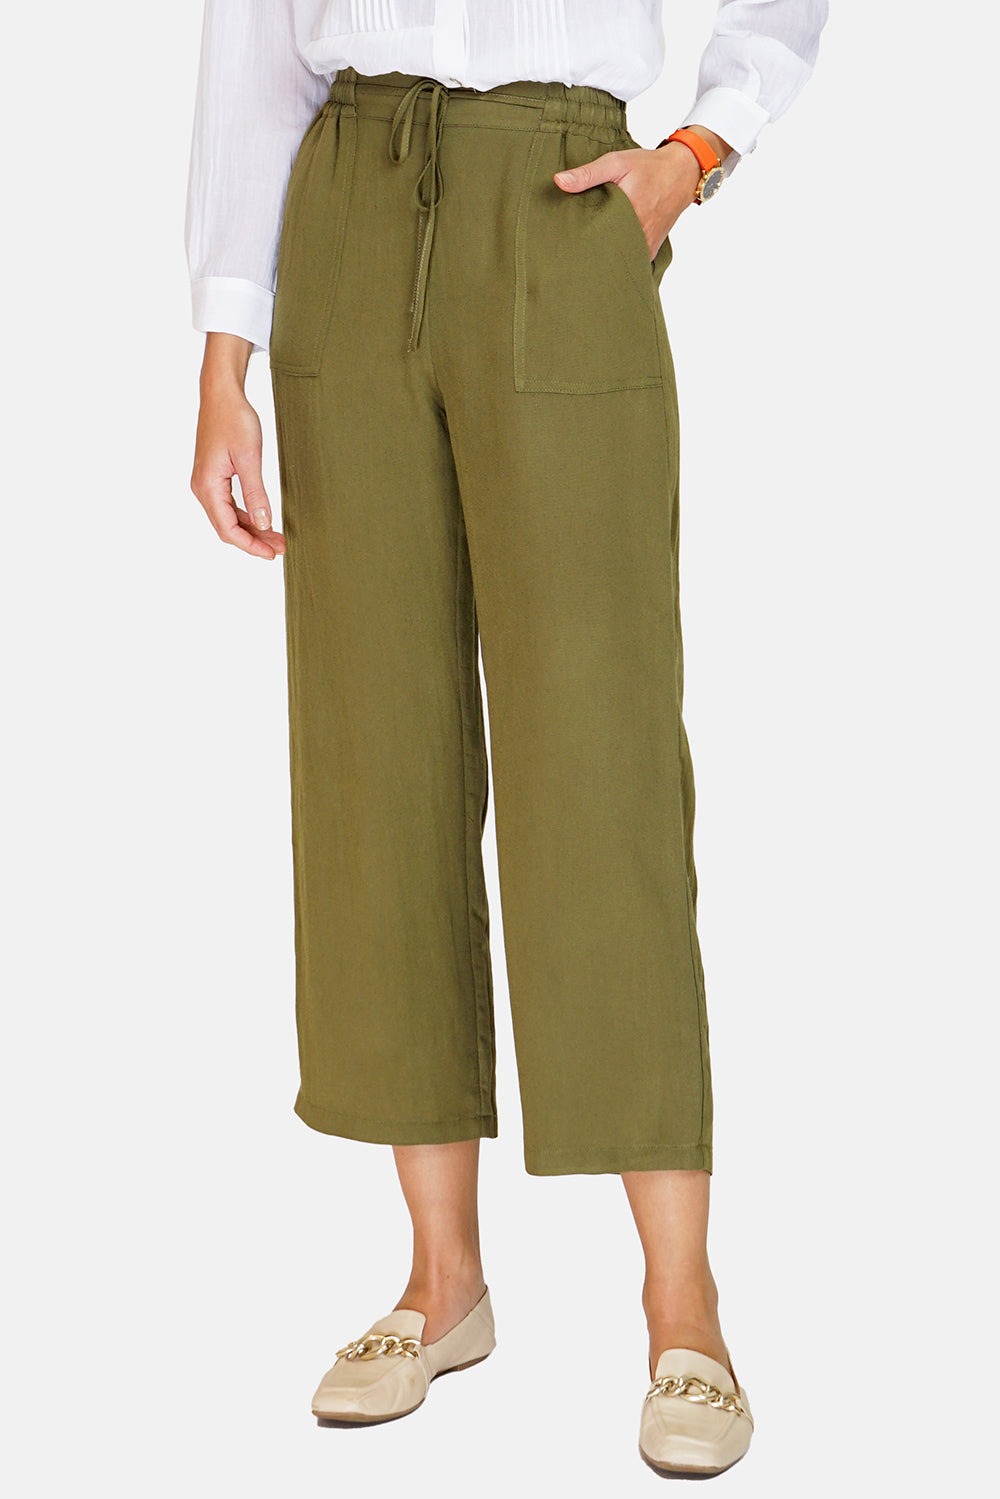 High waist patch pocket pants with drawstring